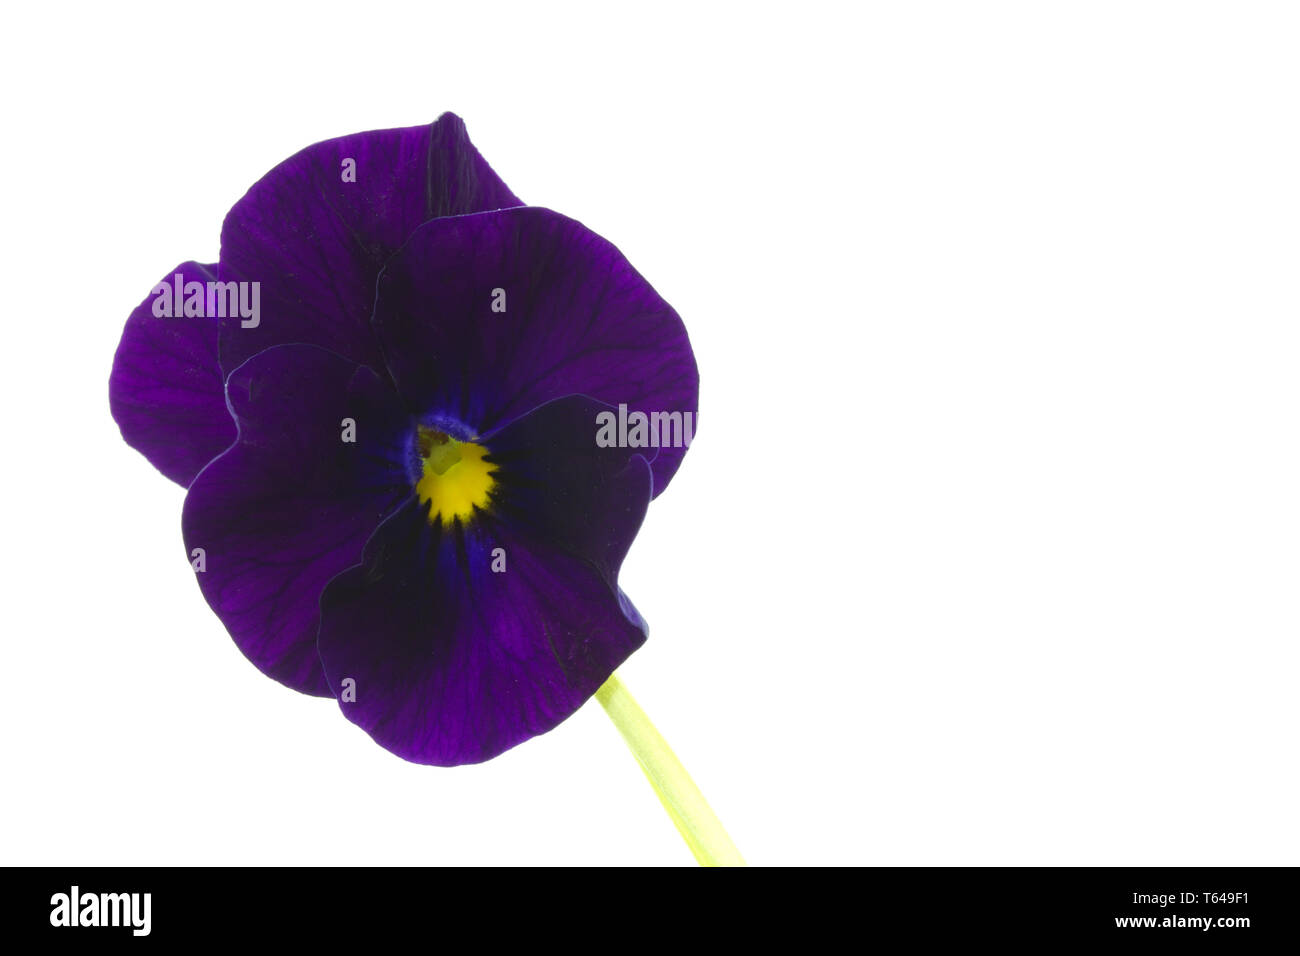 Horned or Tufted Pansy Stock Photo